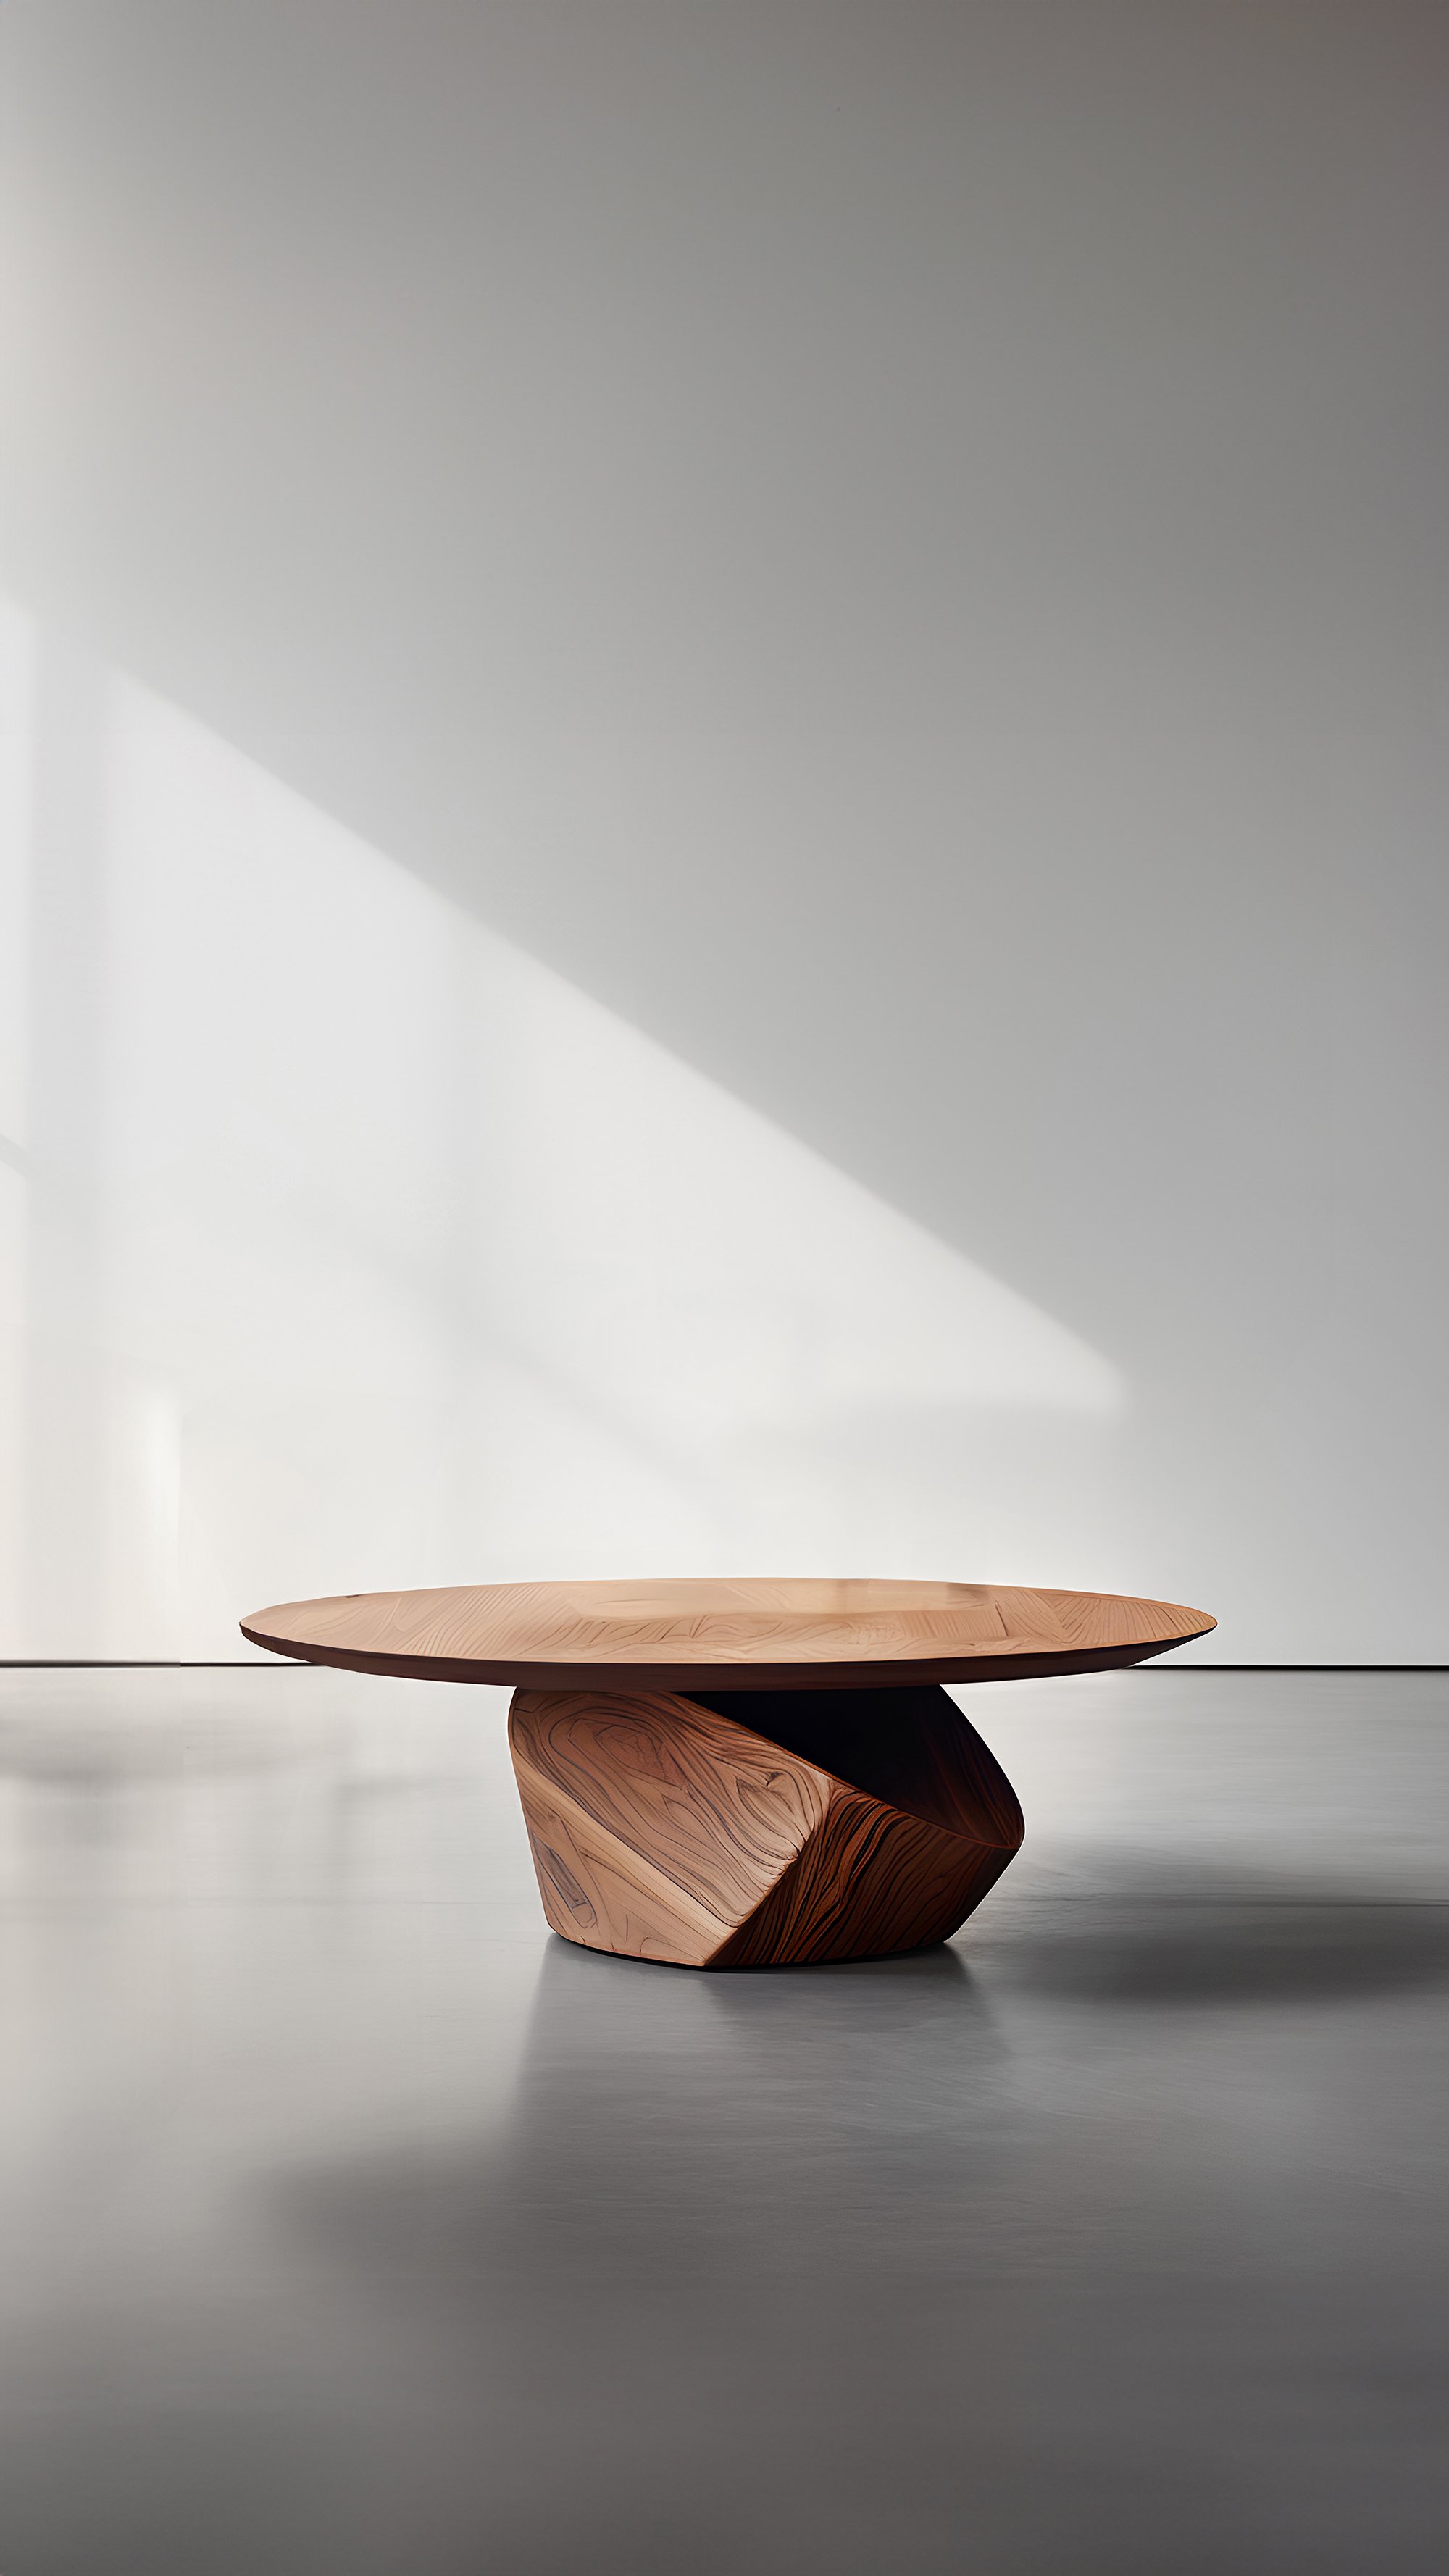 Sculptural Coffee Table Made of Solid Wood, Center Table Solace S35 by Joel Escalona — 6.jpg